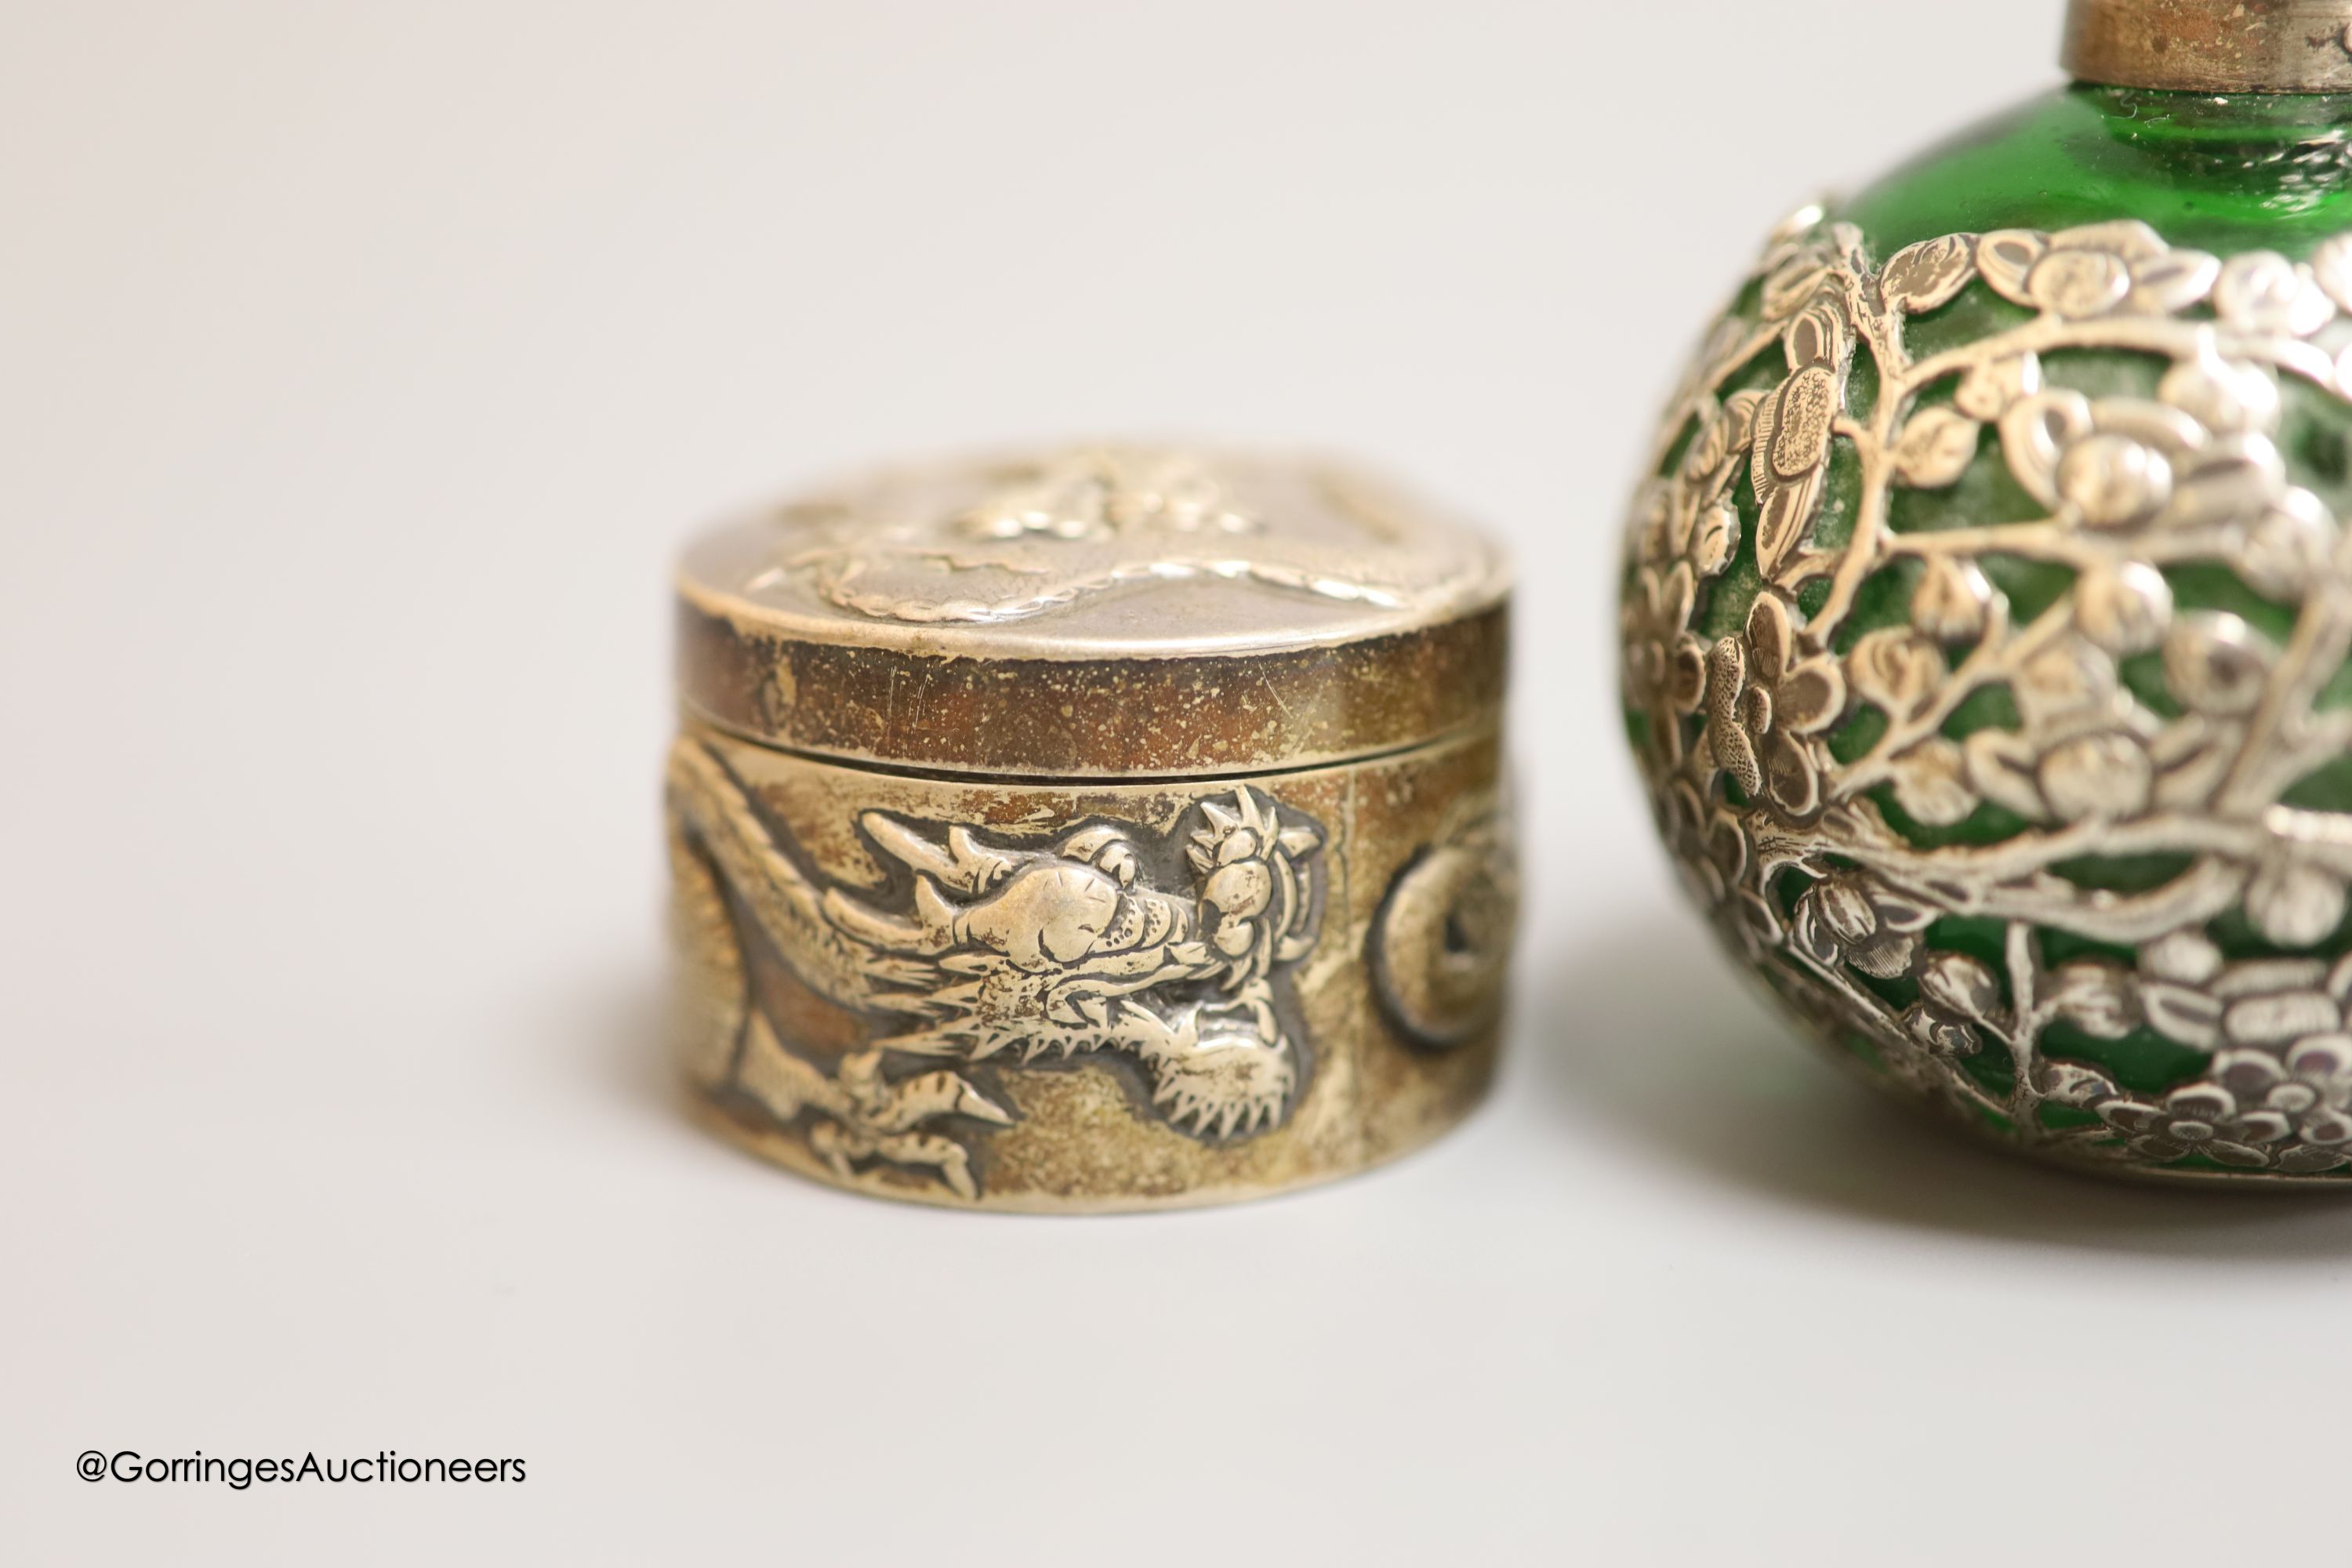 A late 19th/early 20th century Chinese Export white metal circular box, by Wang Hing, embossed with dragons, diameter 5cm, together with a similar white metal overlaid green glass scent flask by Wang Hing, height 11.6cm.